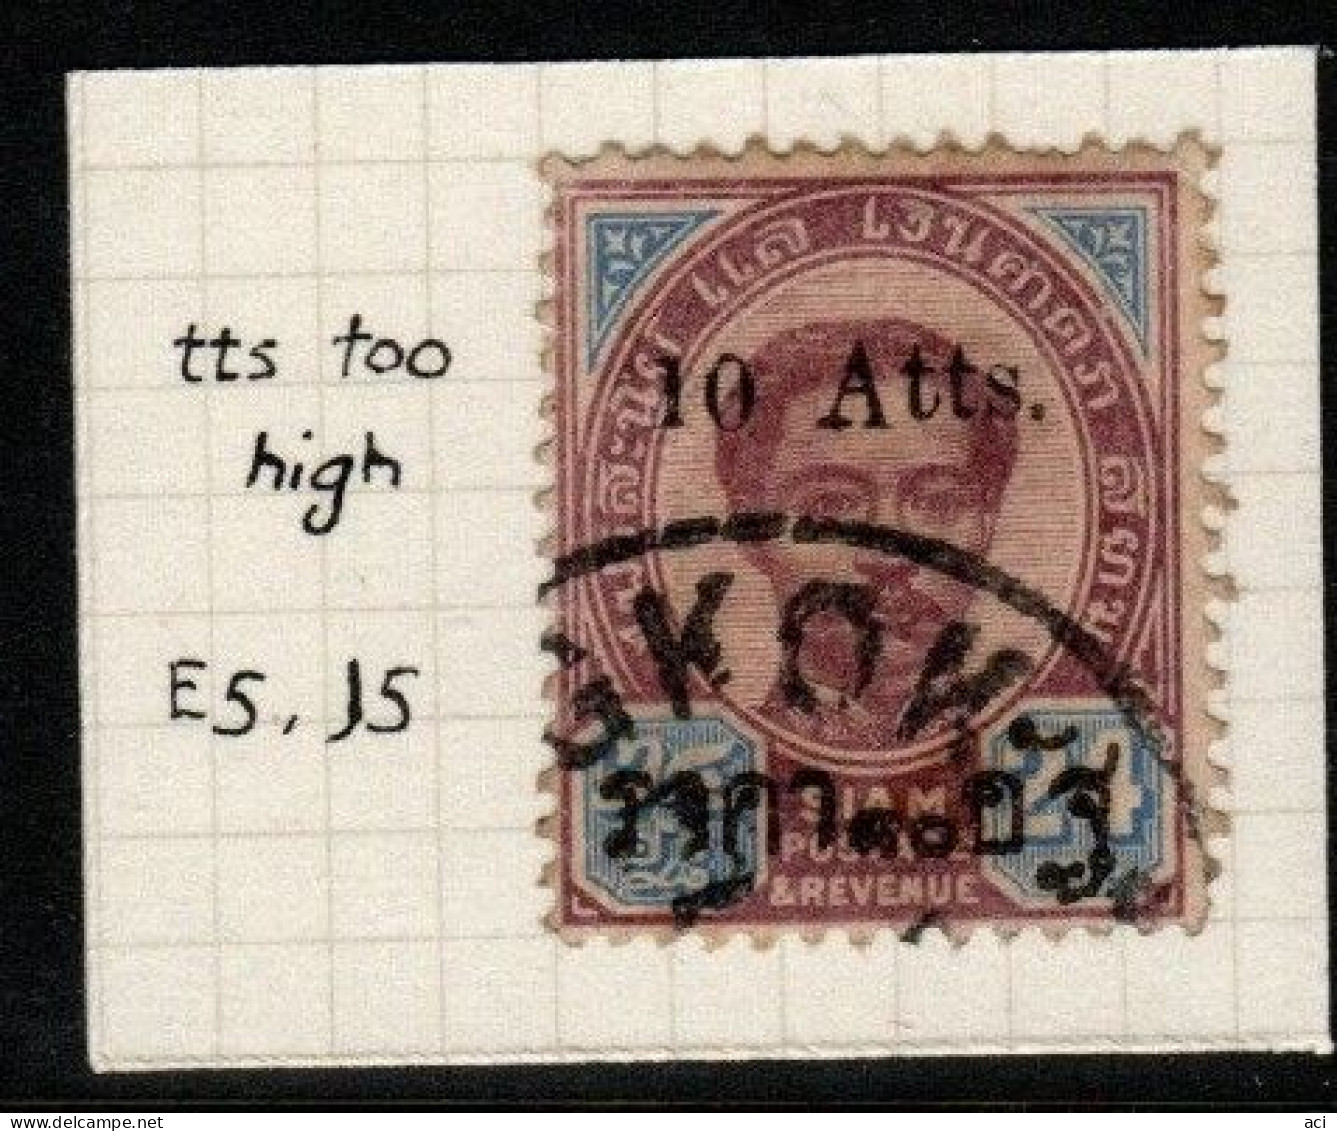 Thailand 1895 Provisional Issue  10Atts On 24 Atts  Tts Too High Variety,used, - Tailandia